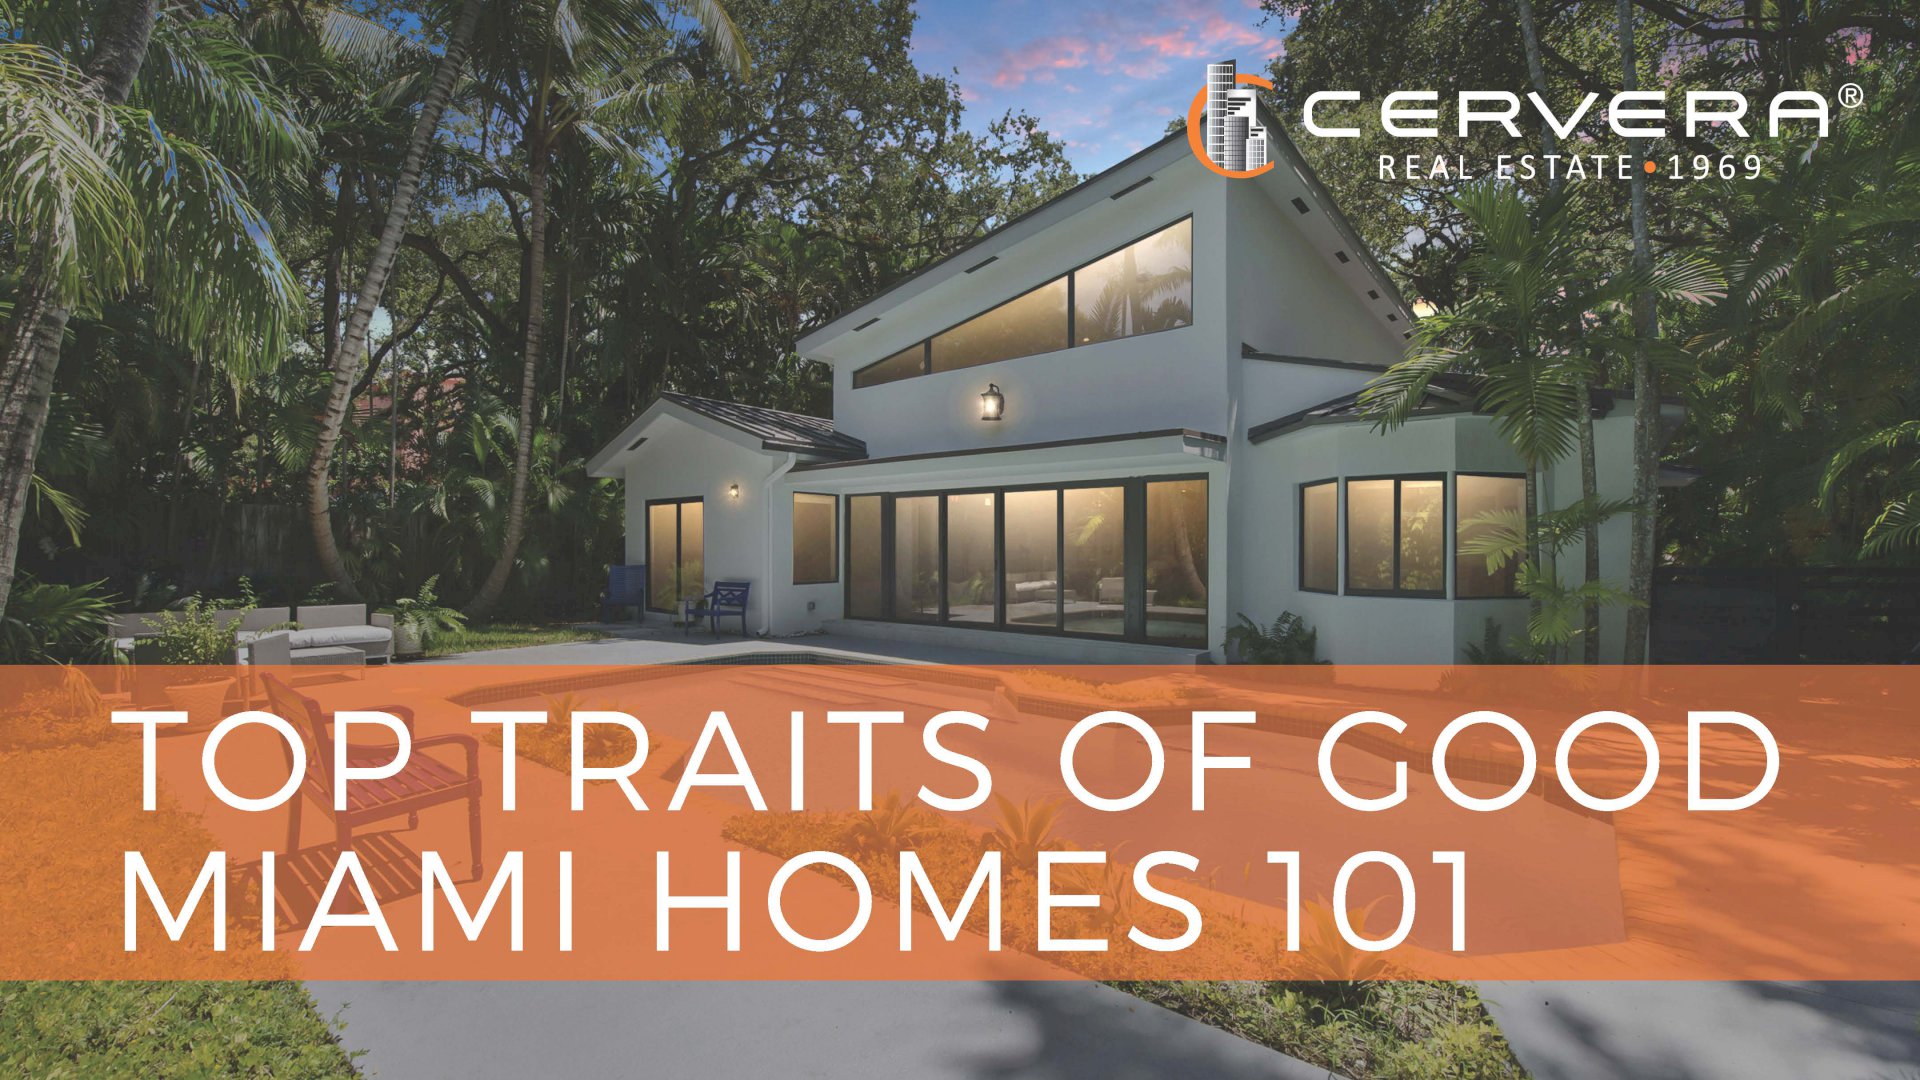 Top traits of good Miami homes people look for